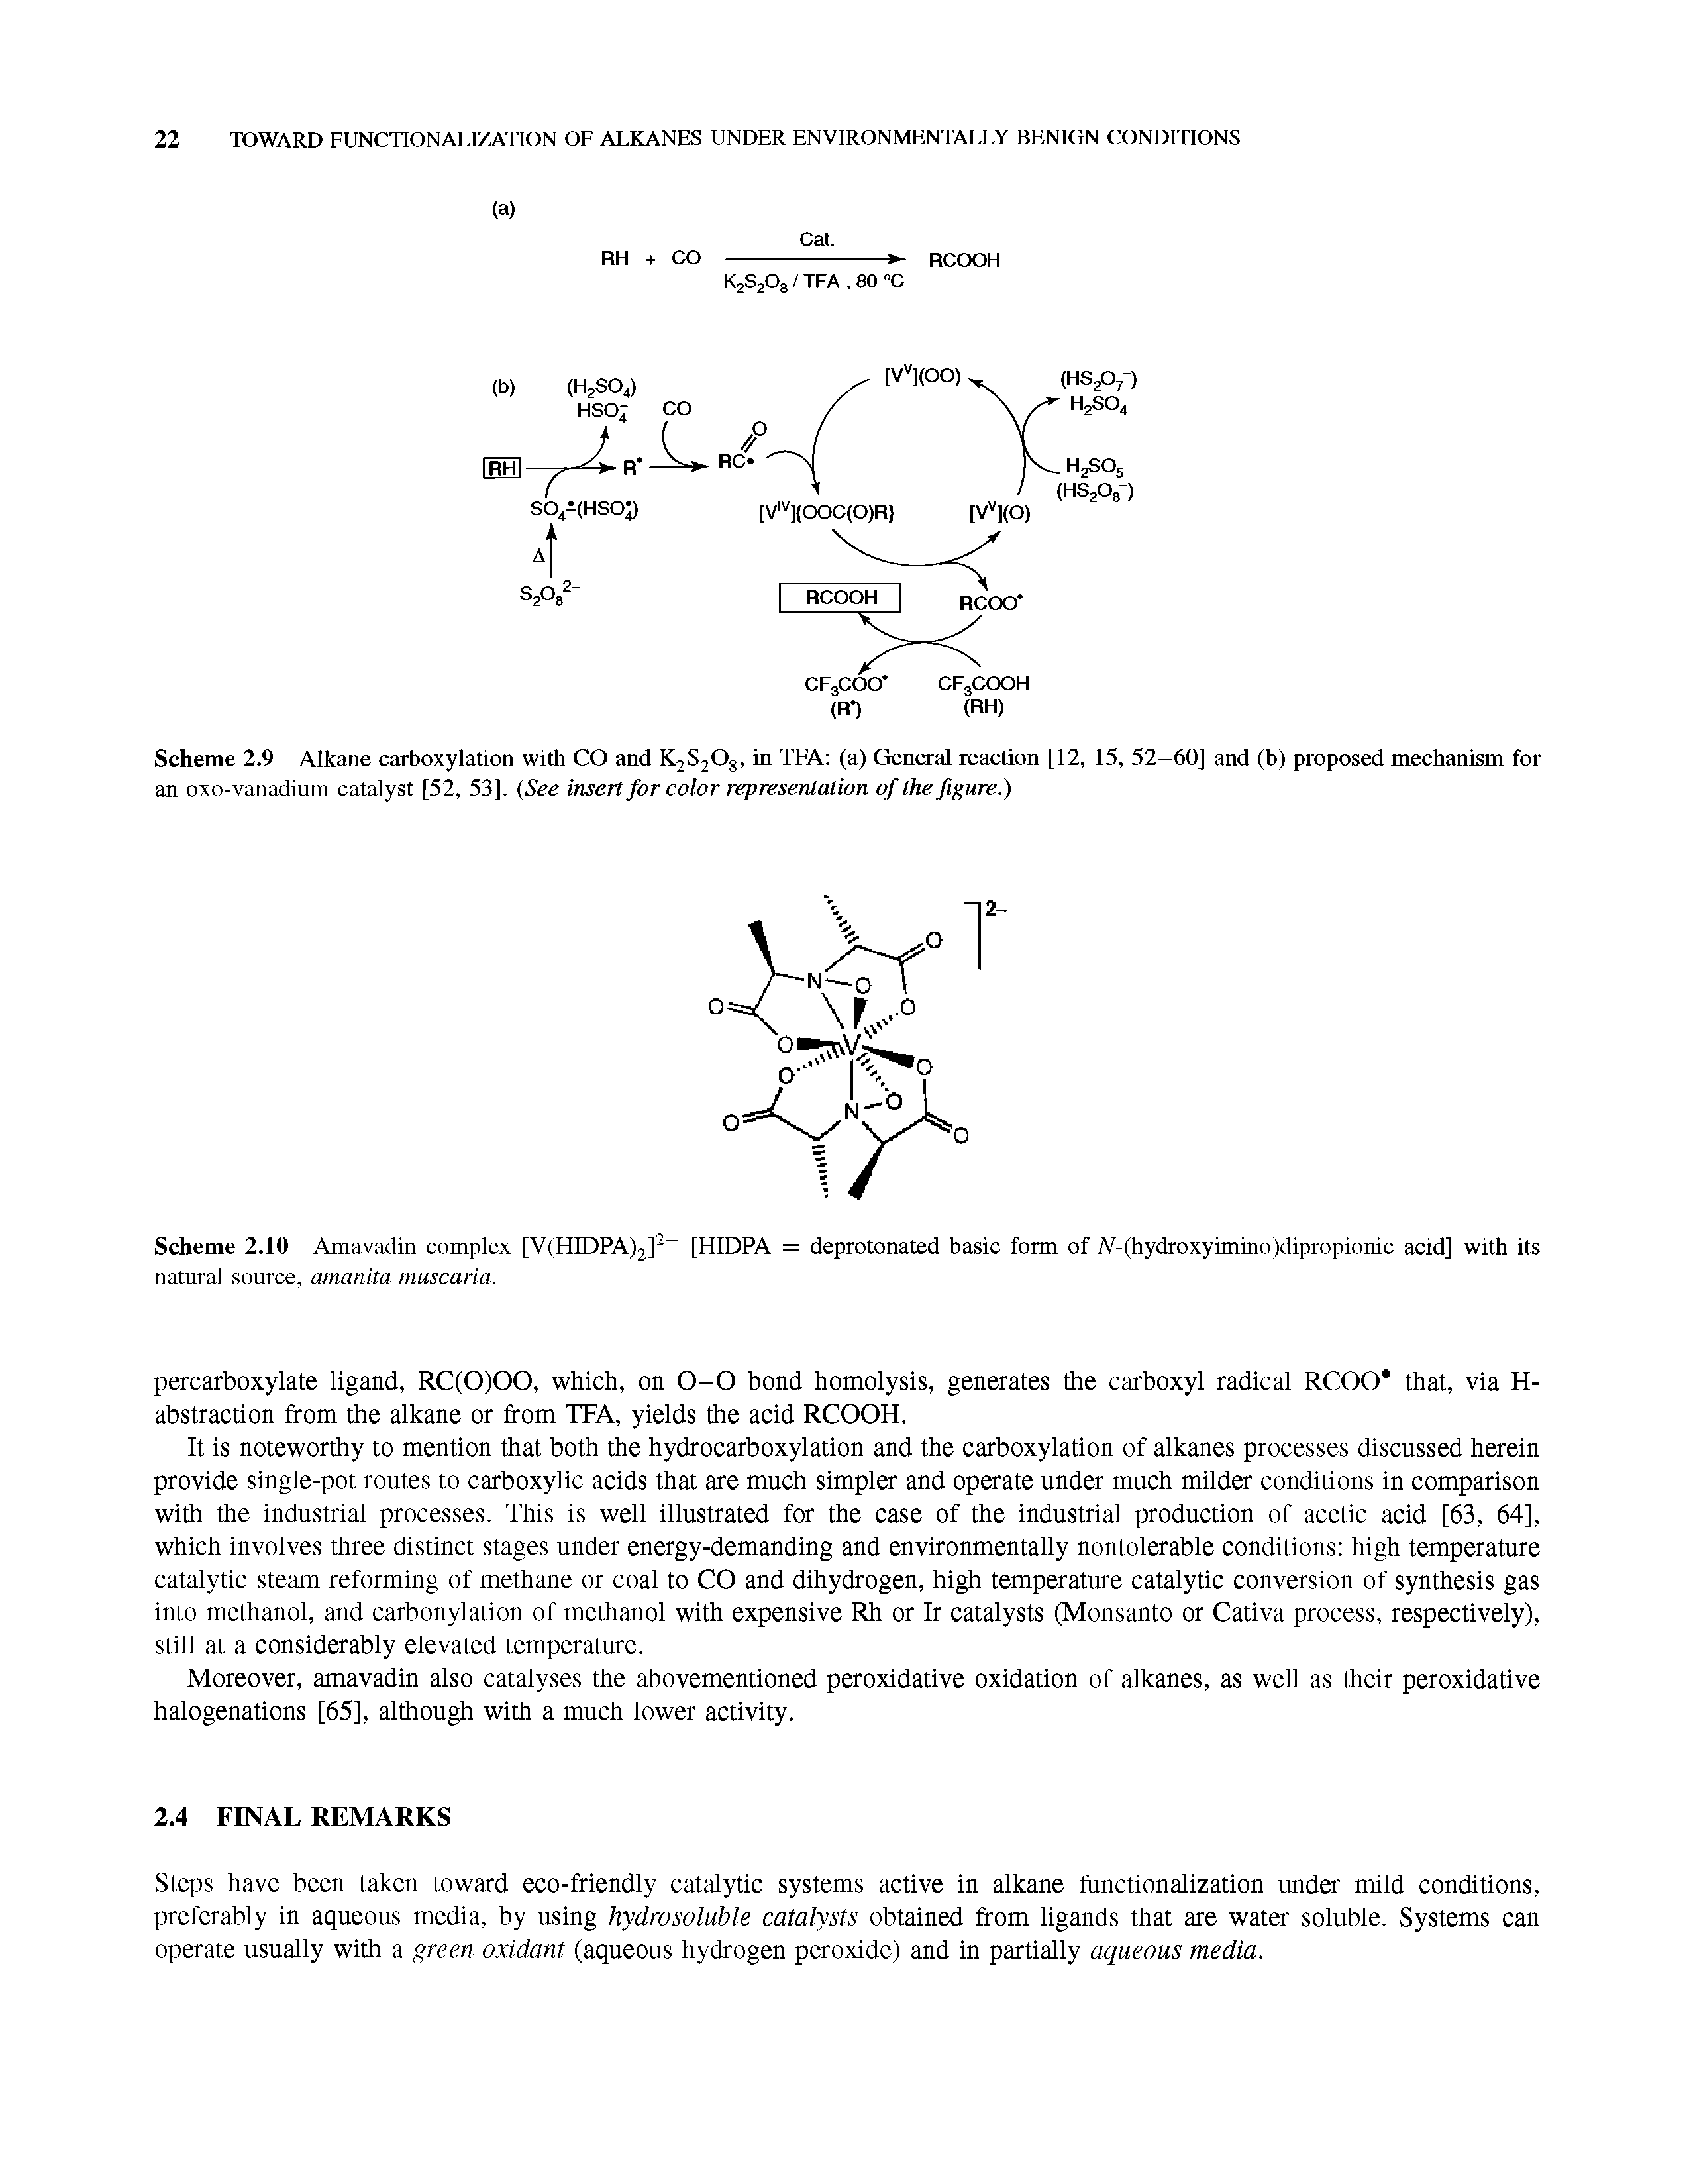 Scheme 2.9 Alkane carboxylation with CO and K2S20g, in TFA (a) General reaction [12, 15, 52-60] and (b) proposed mechanism for...